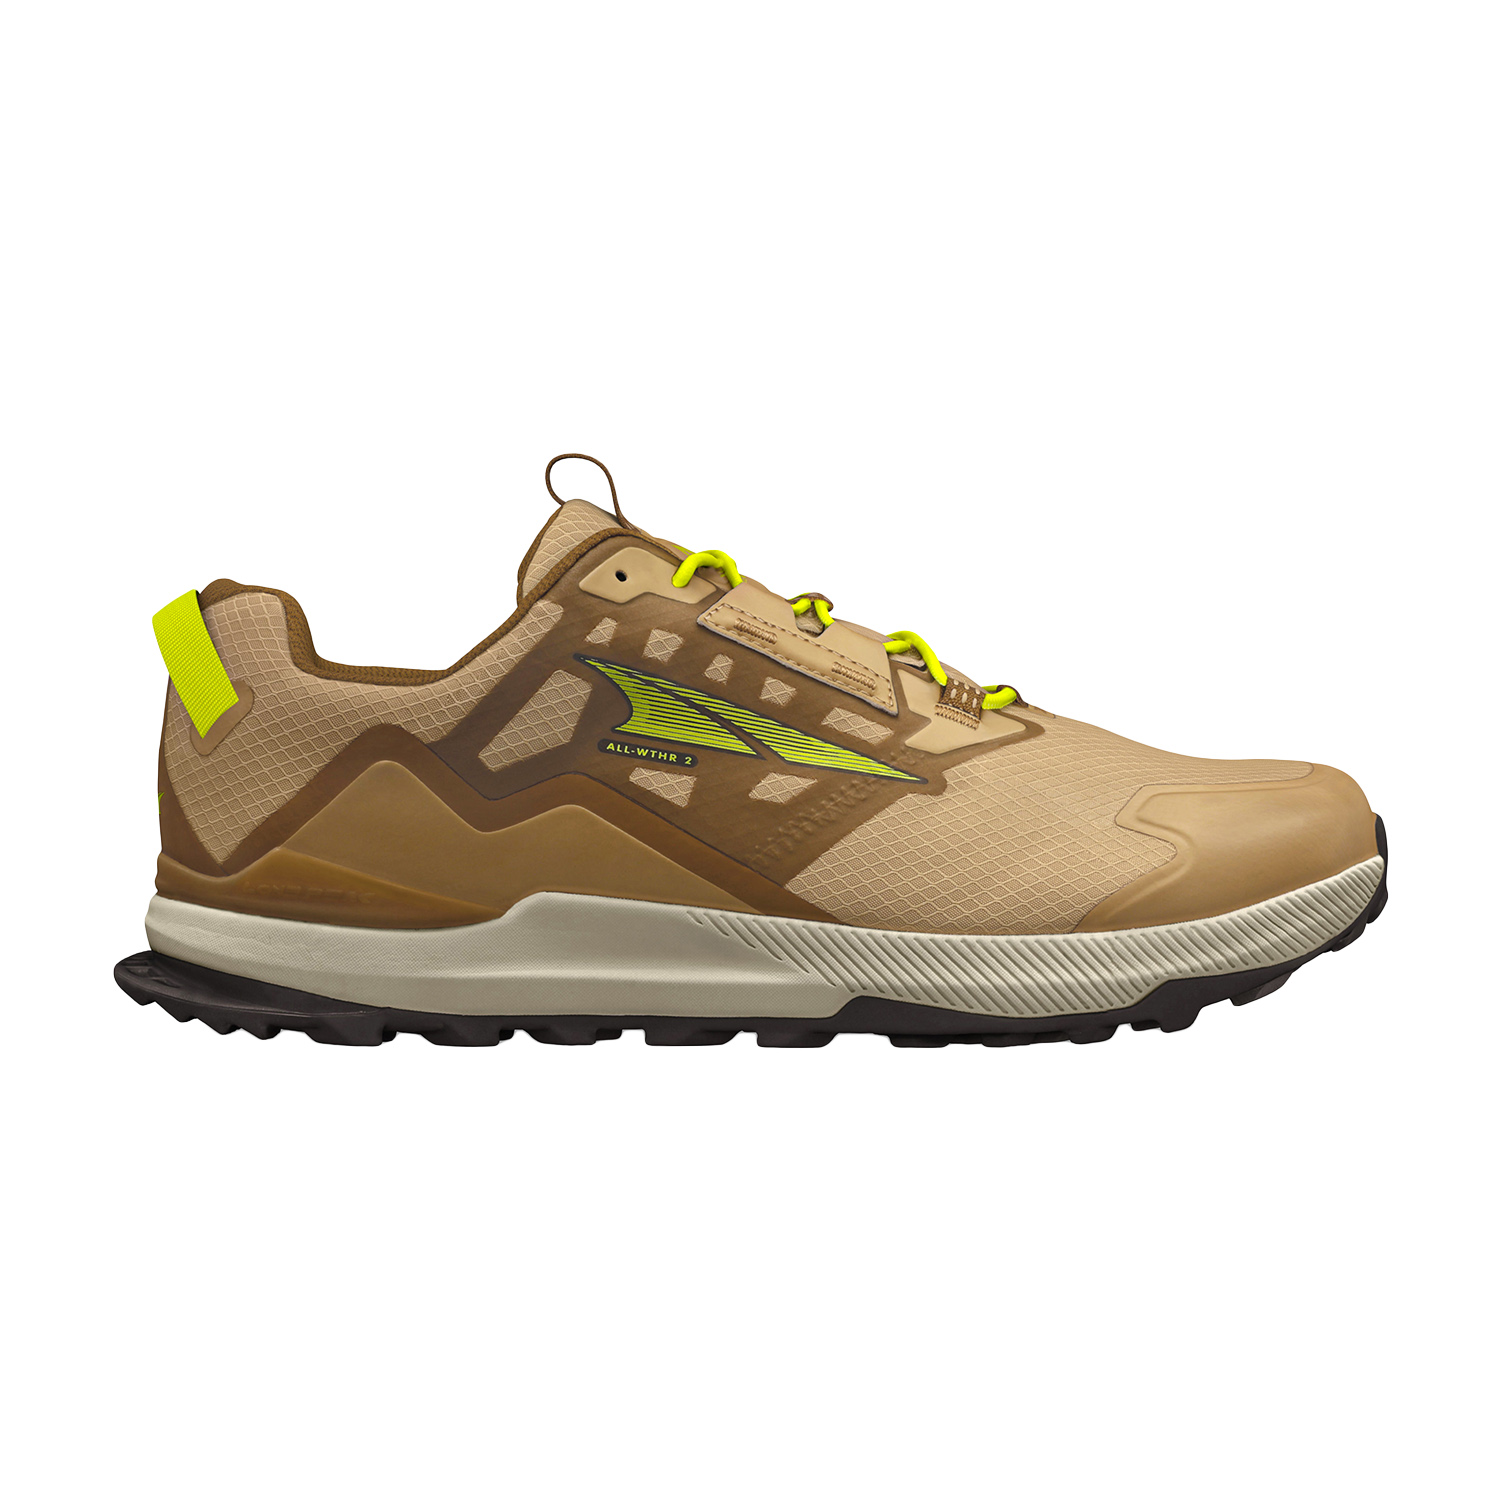 Altra Lone Peak All Weather Low 2 - Brown